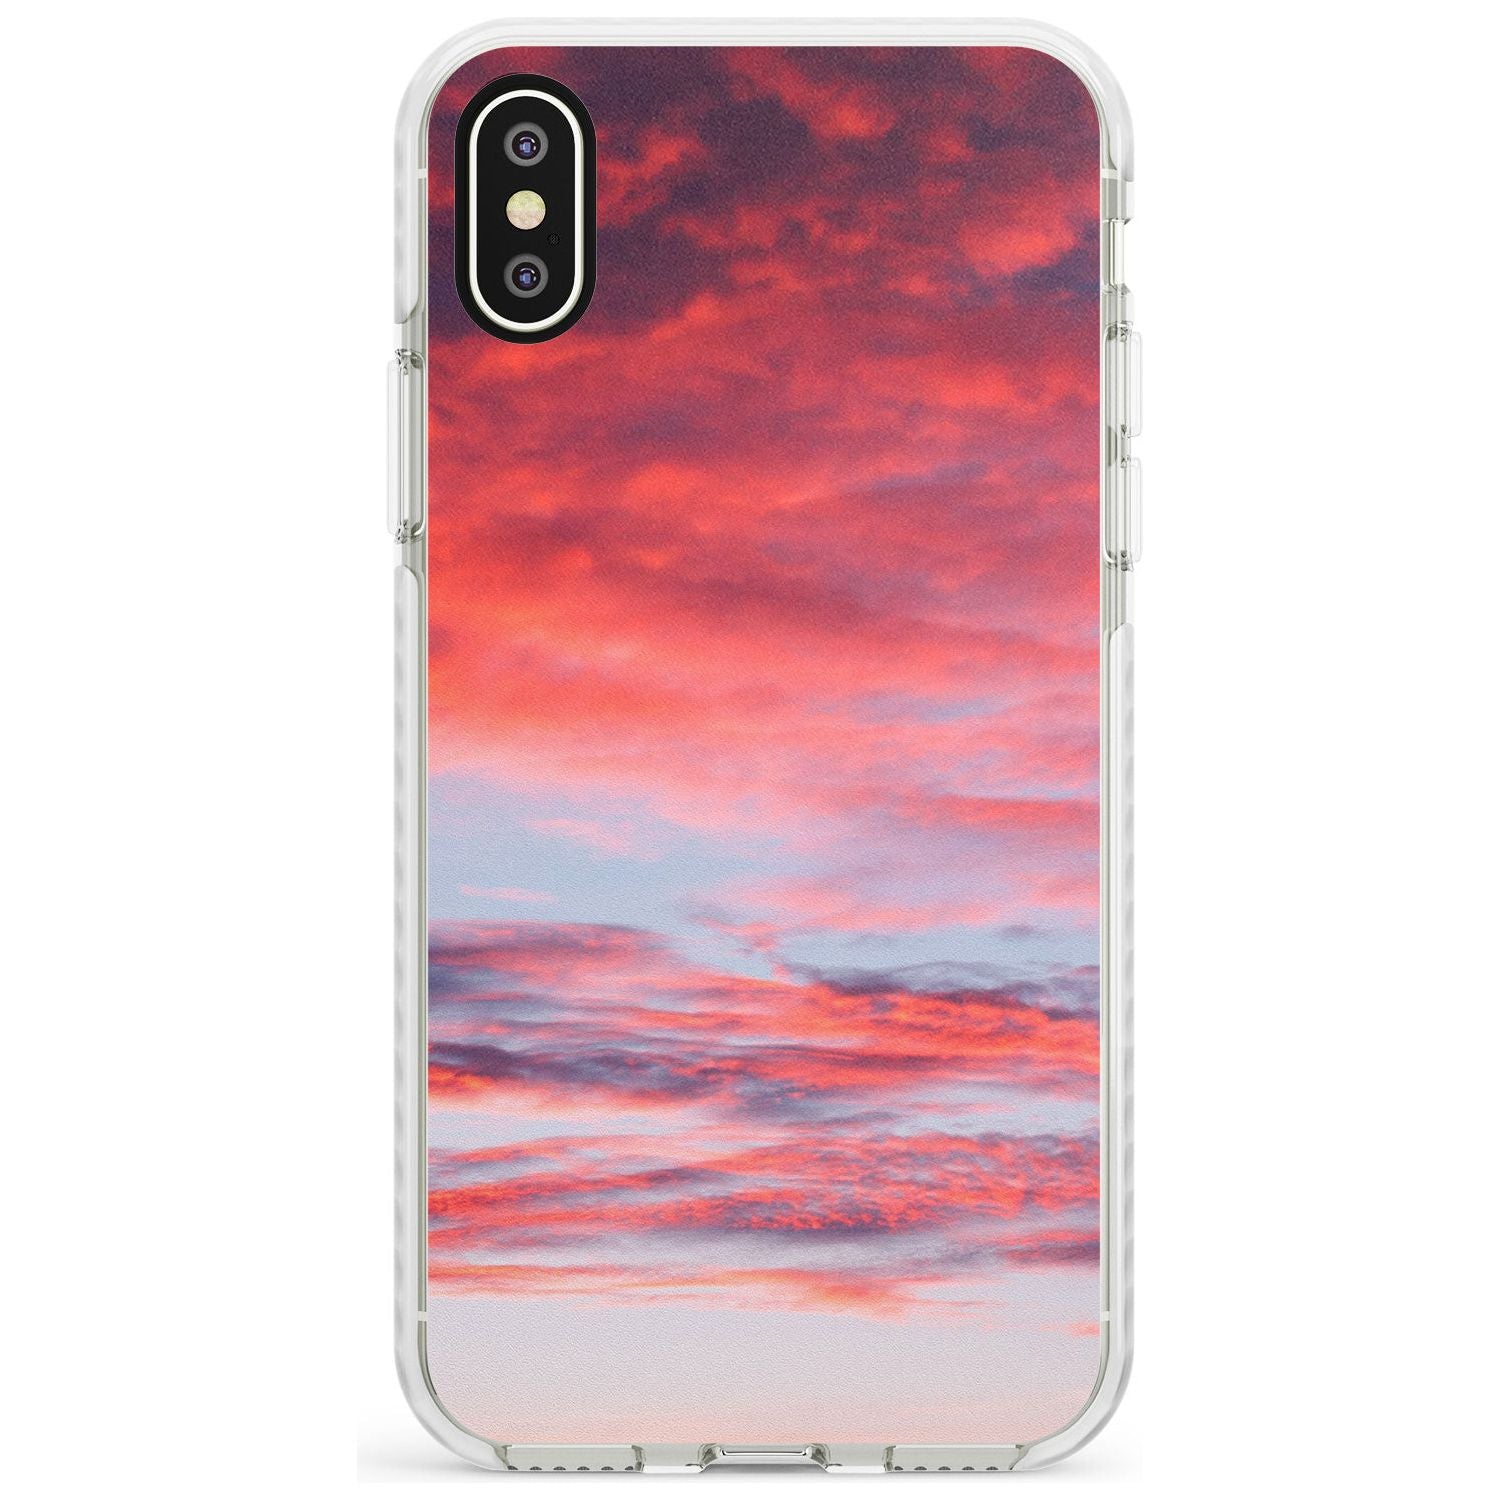 Pink Cloudy Sunset Photograph Impact Phone Case for iPhone X XS Max XR